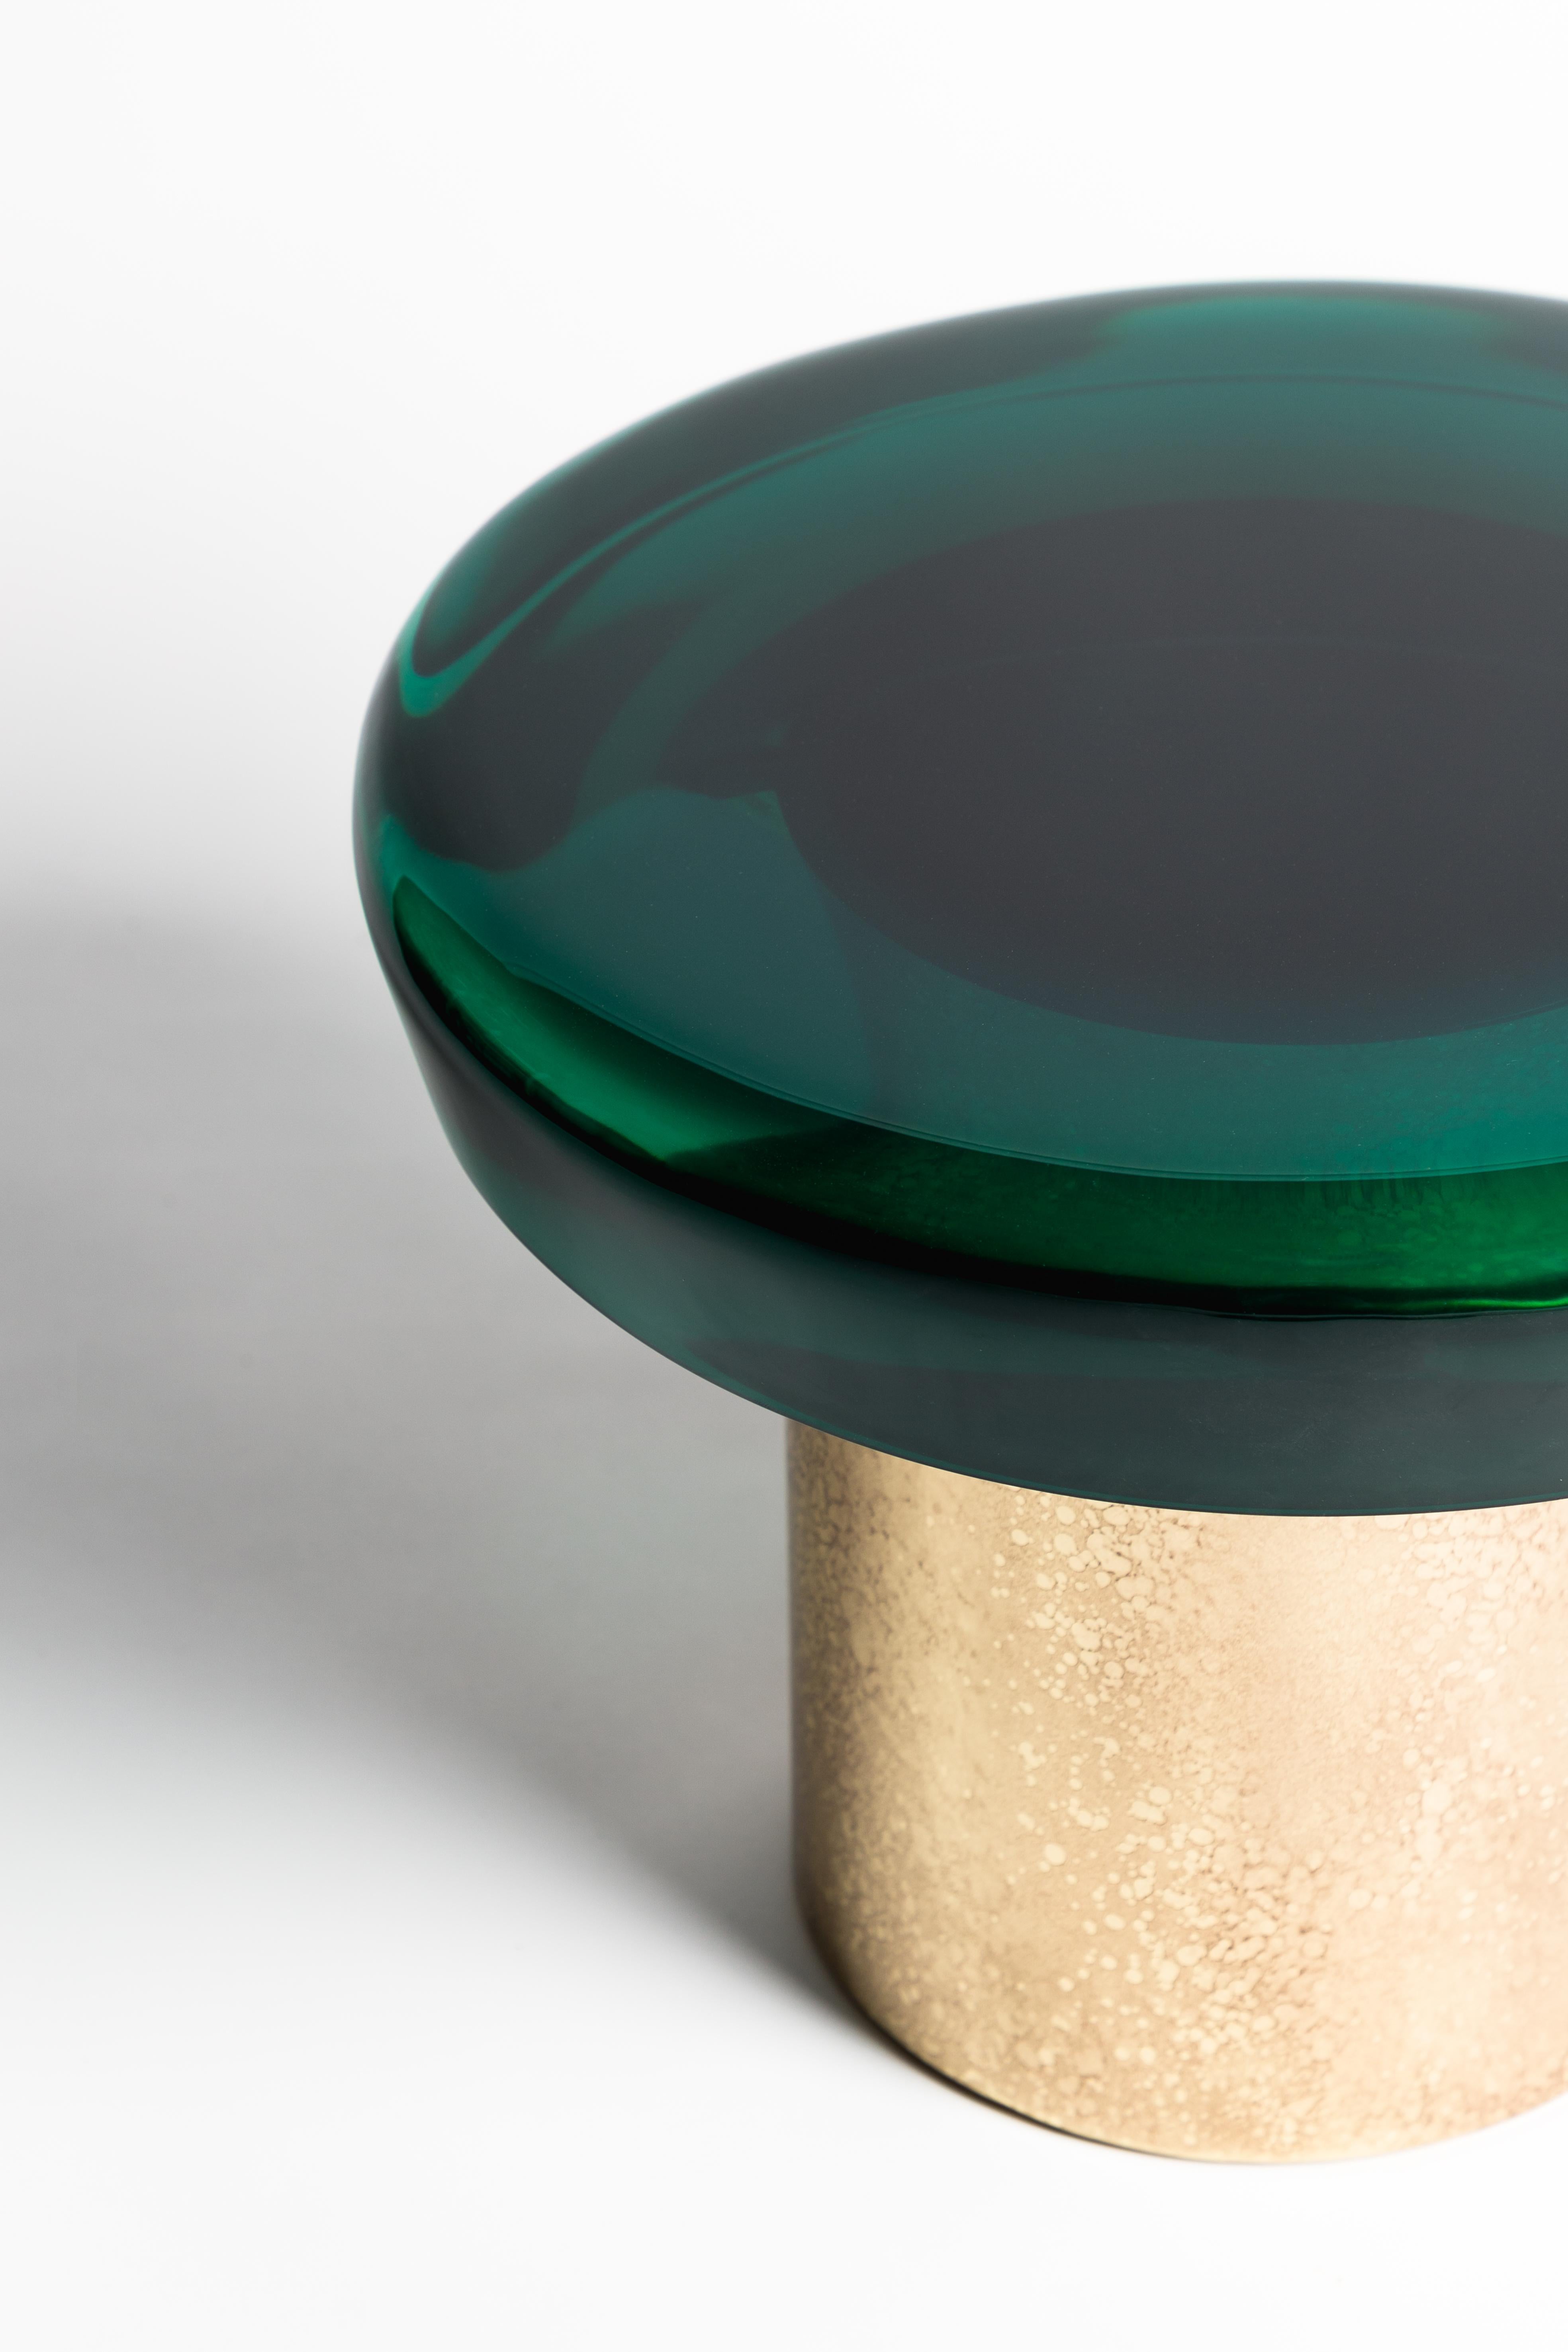 This coffee table resembles a precious gem, showcasing an otherworldly translucency, a lavish tactile quality, and a reflective finish that poetically interacts with light. The resin tabletop is set upon a brass frame with distinctive veining,